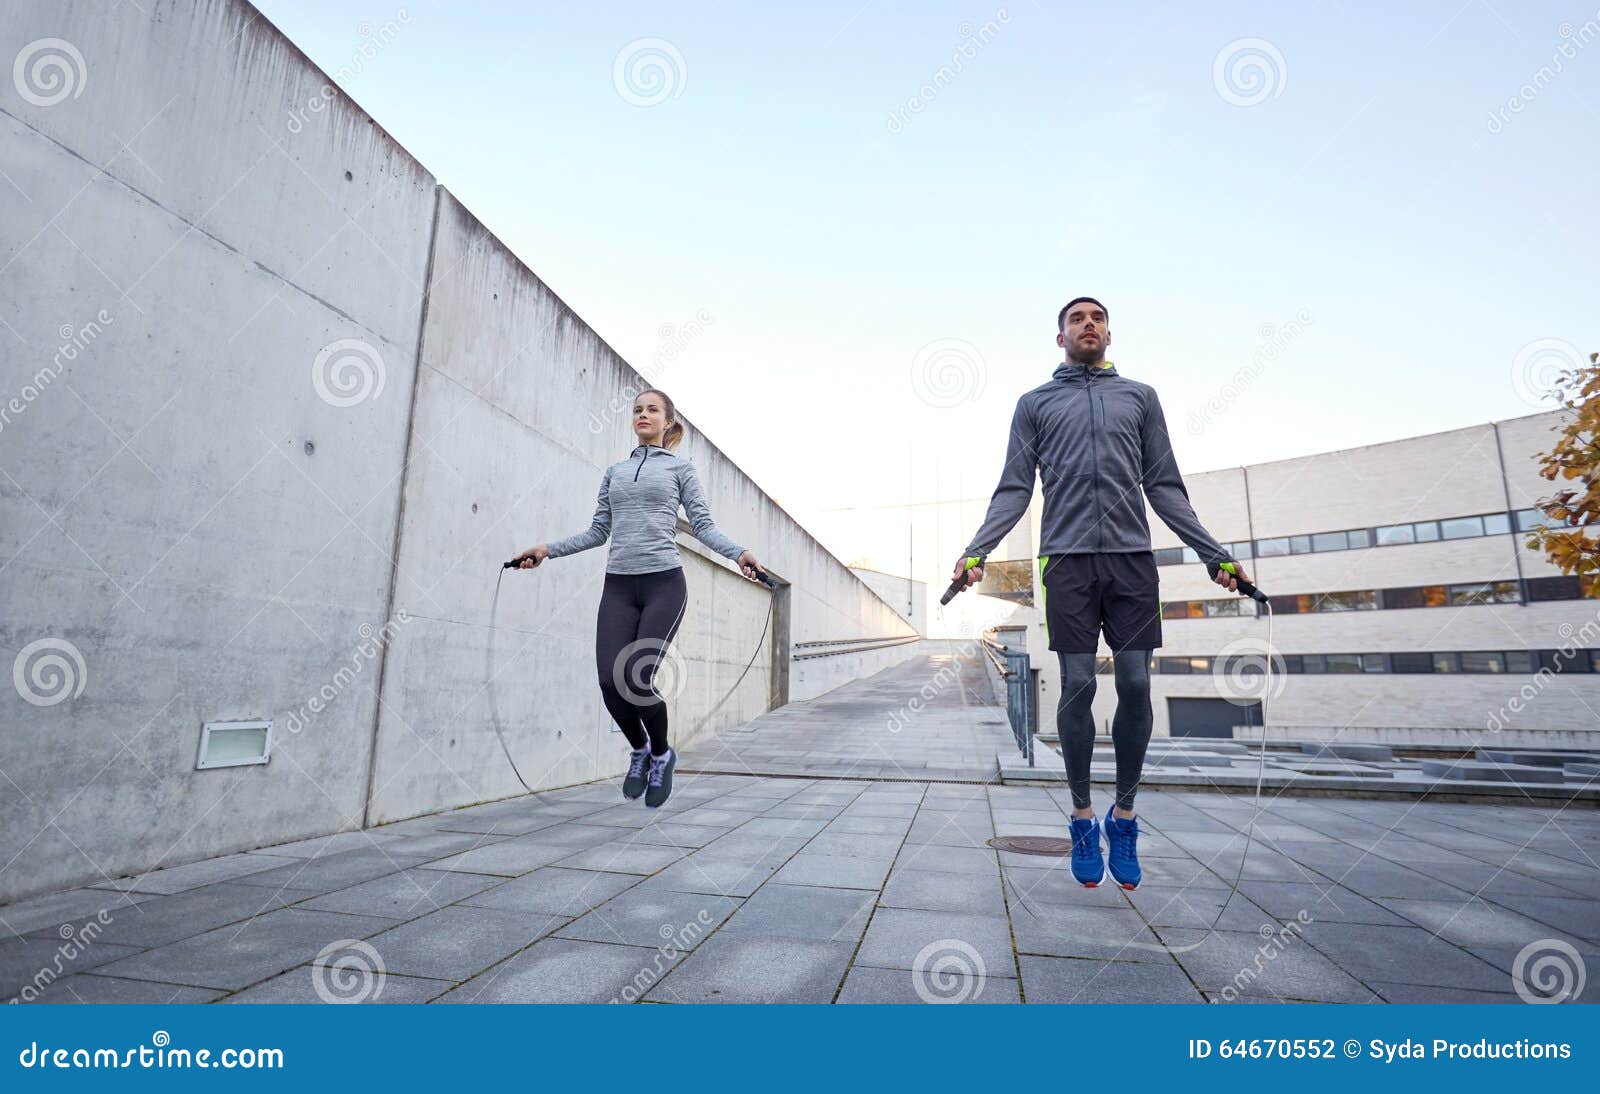 man and woman exercising with jump-rope outdoors